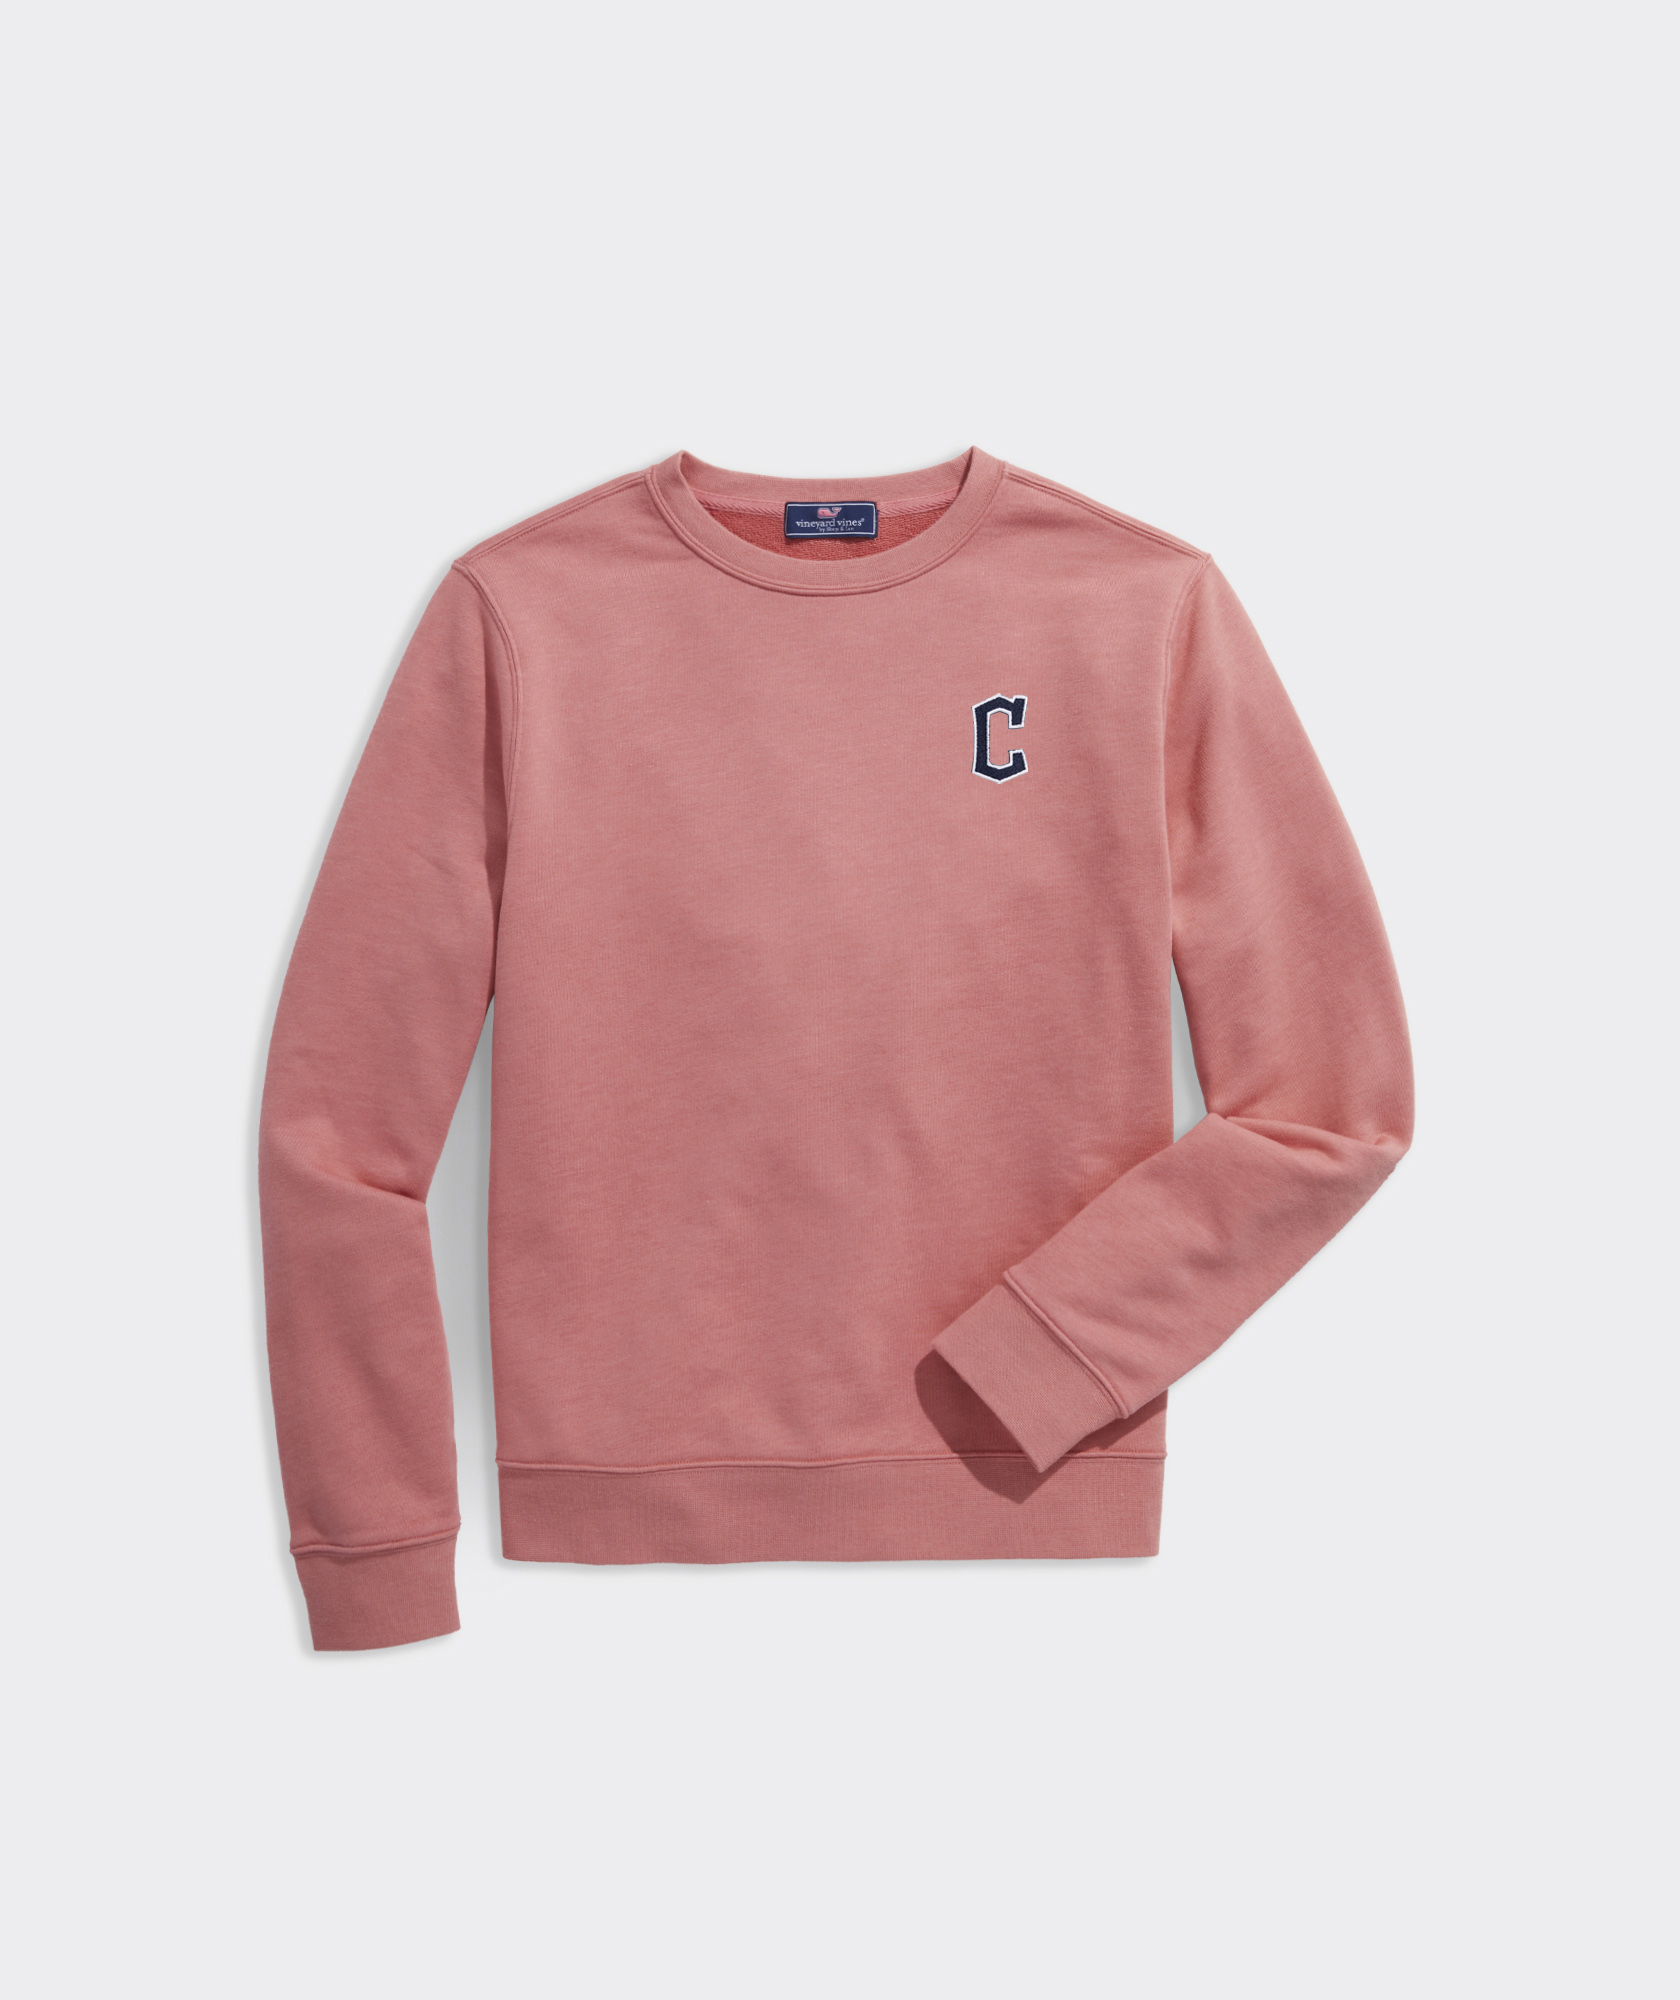 Cleveland Guardians Collection by vineyard vines